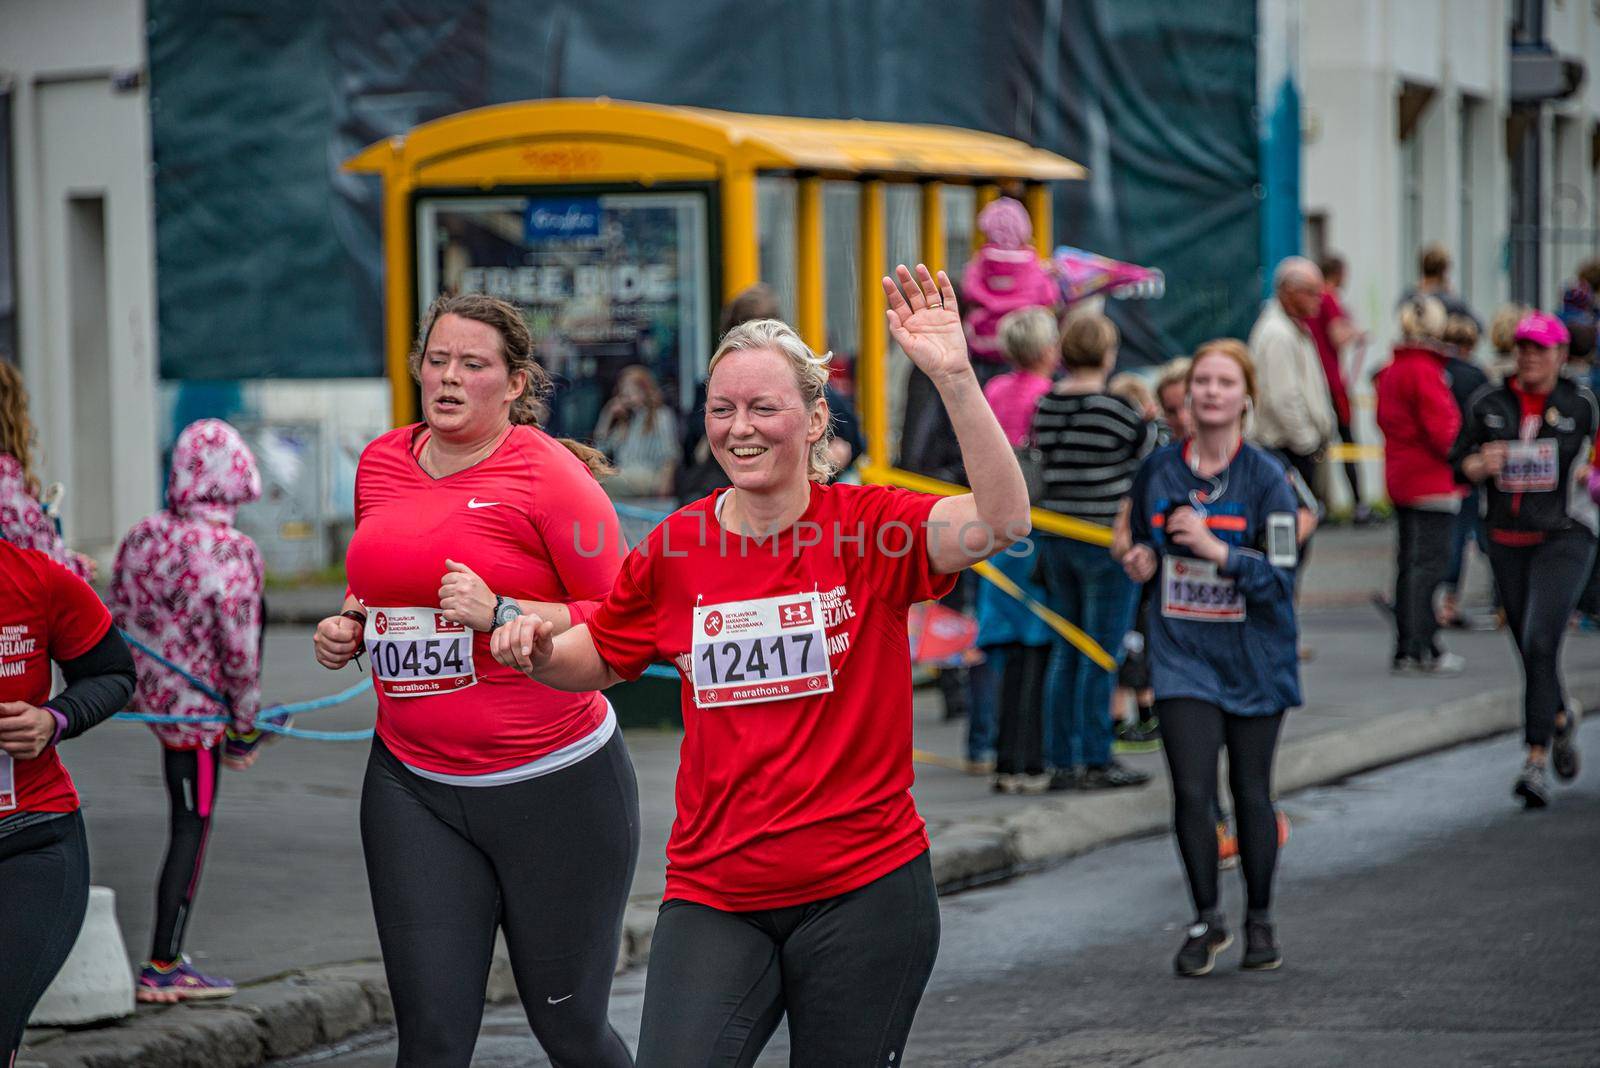 Runners at annual city marathon in Reykjavik downtown, Iceland